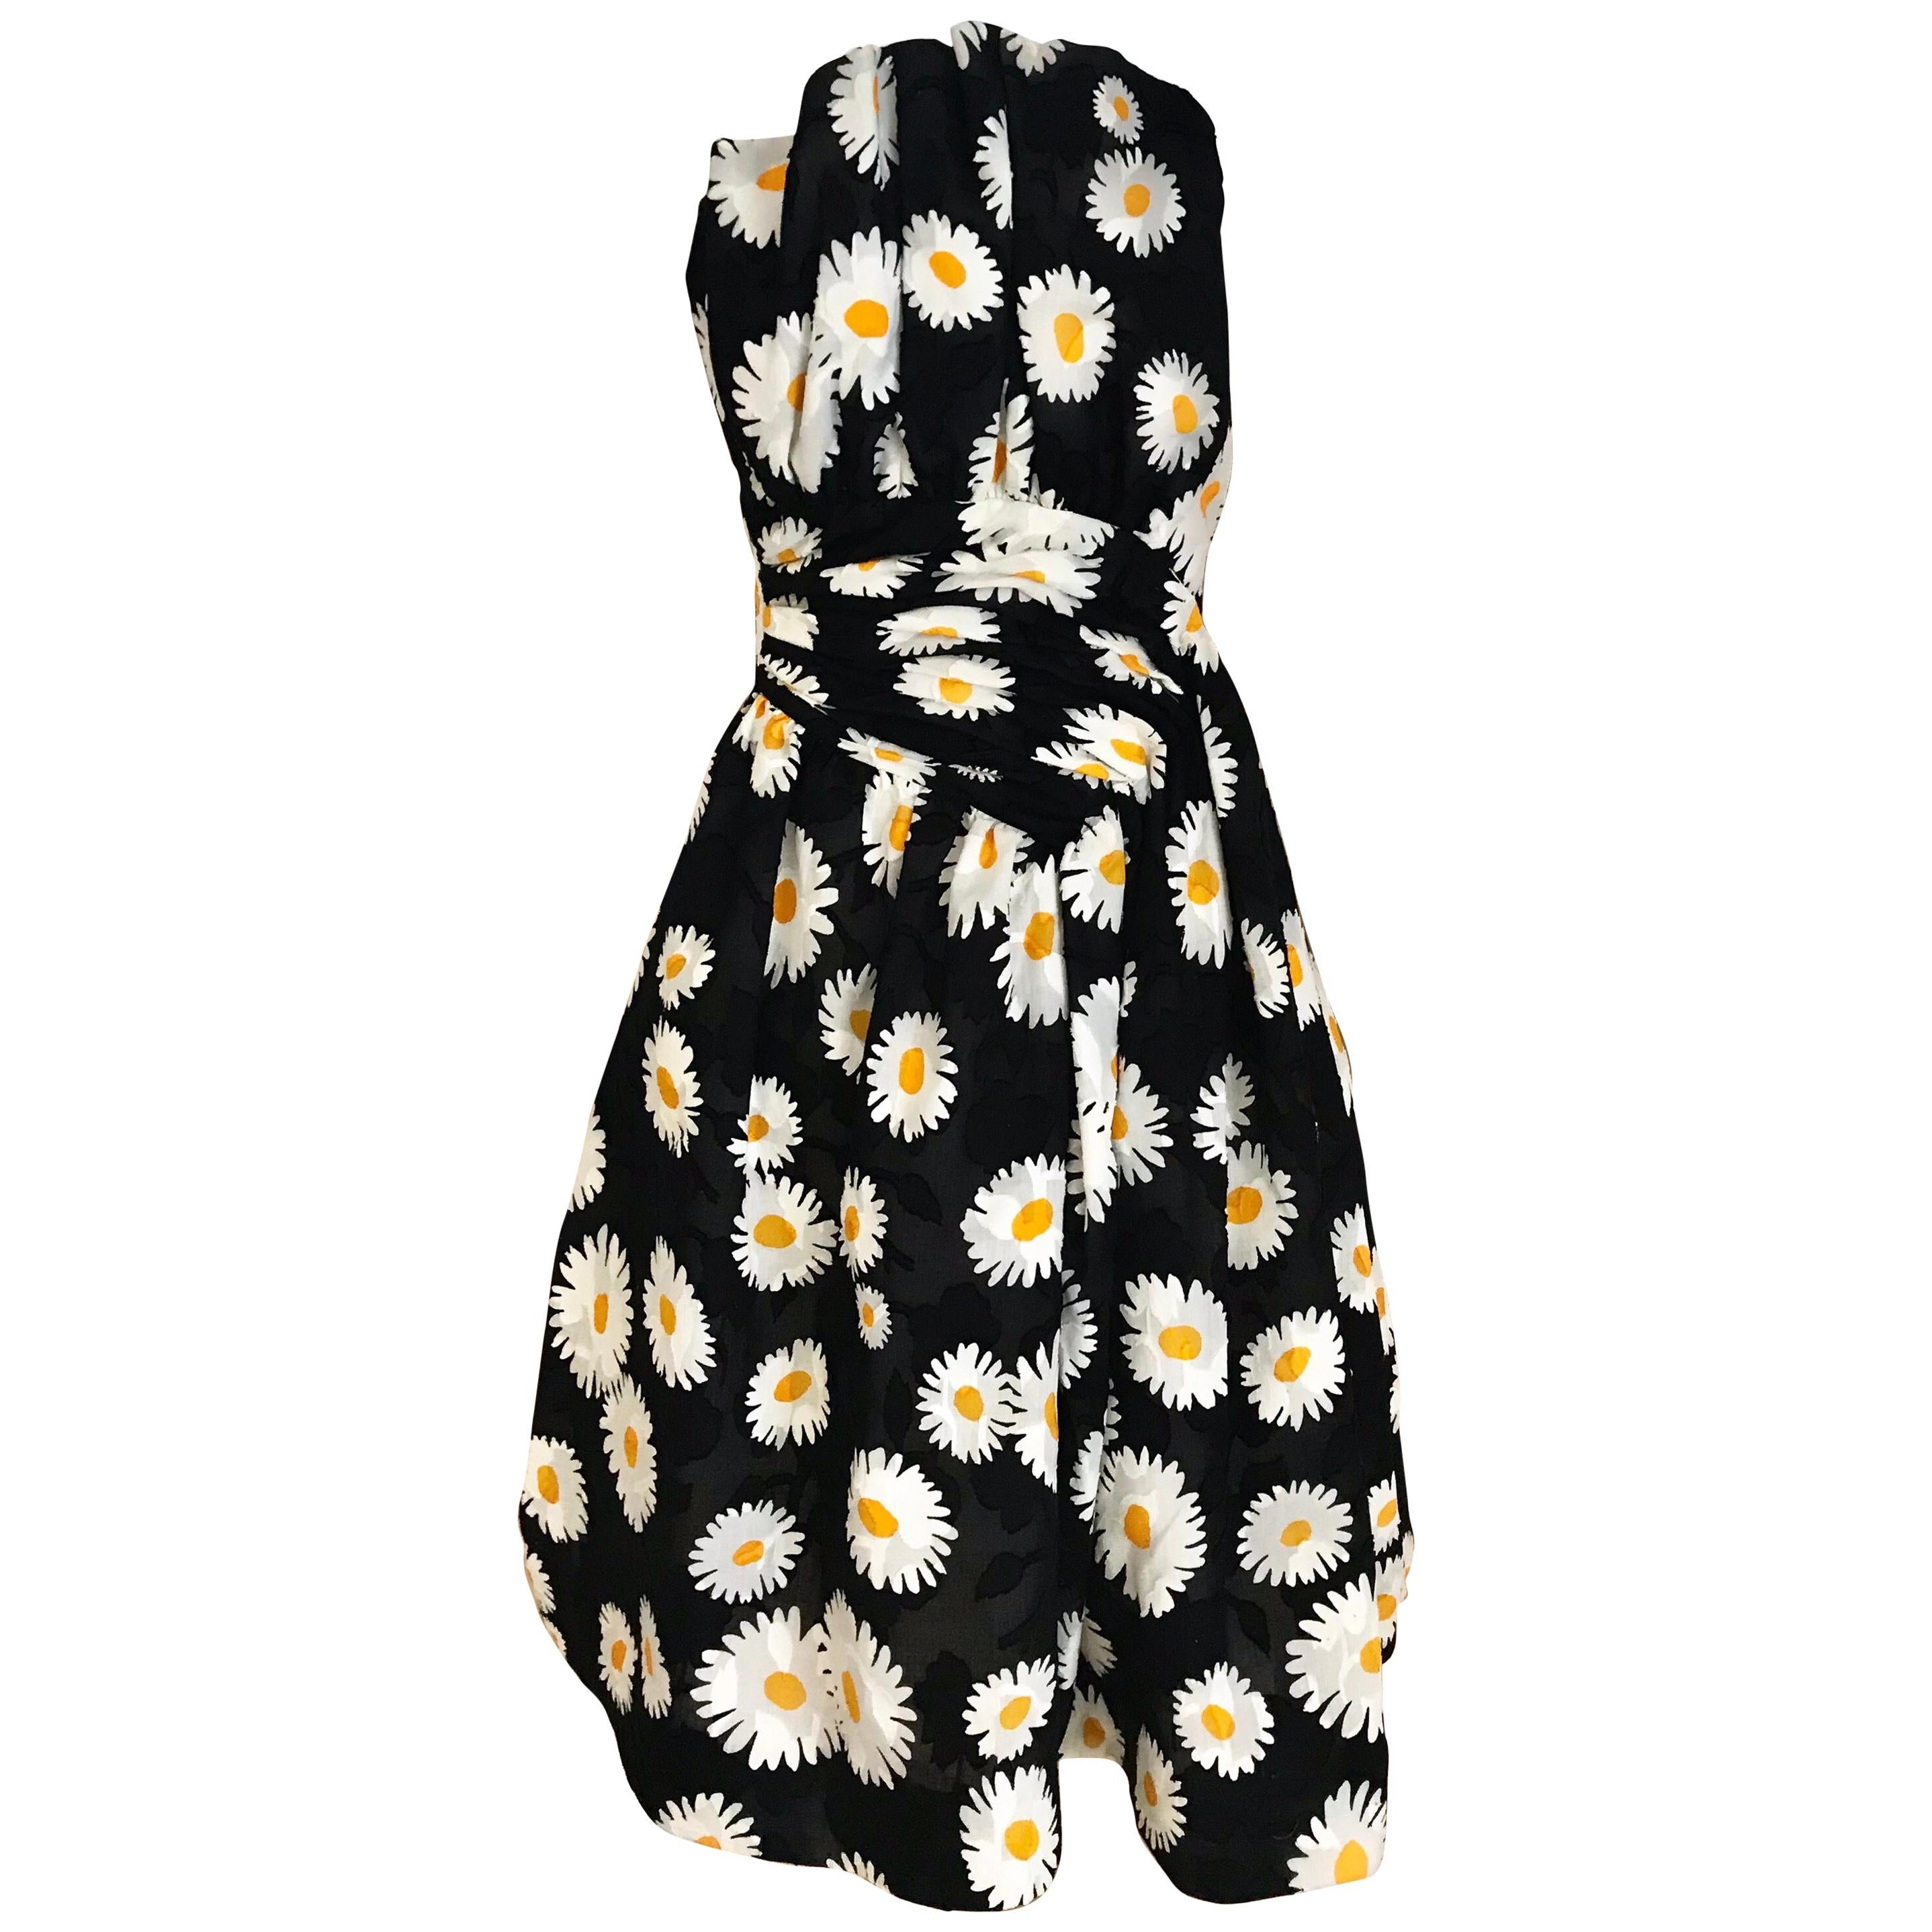  Vintage Scaasi Daisy Print Strapless Cocktail Dress